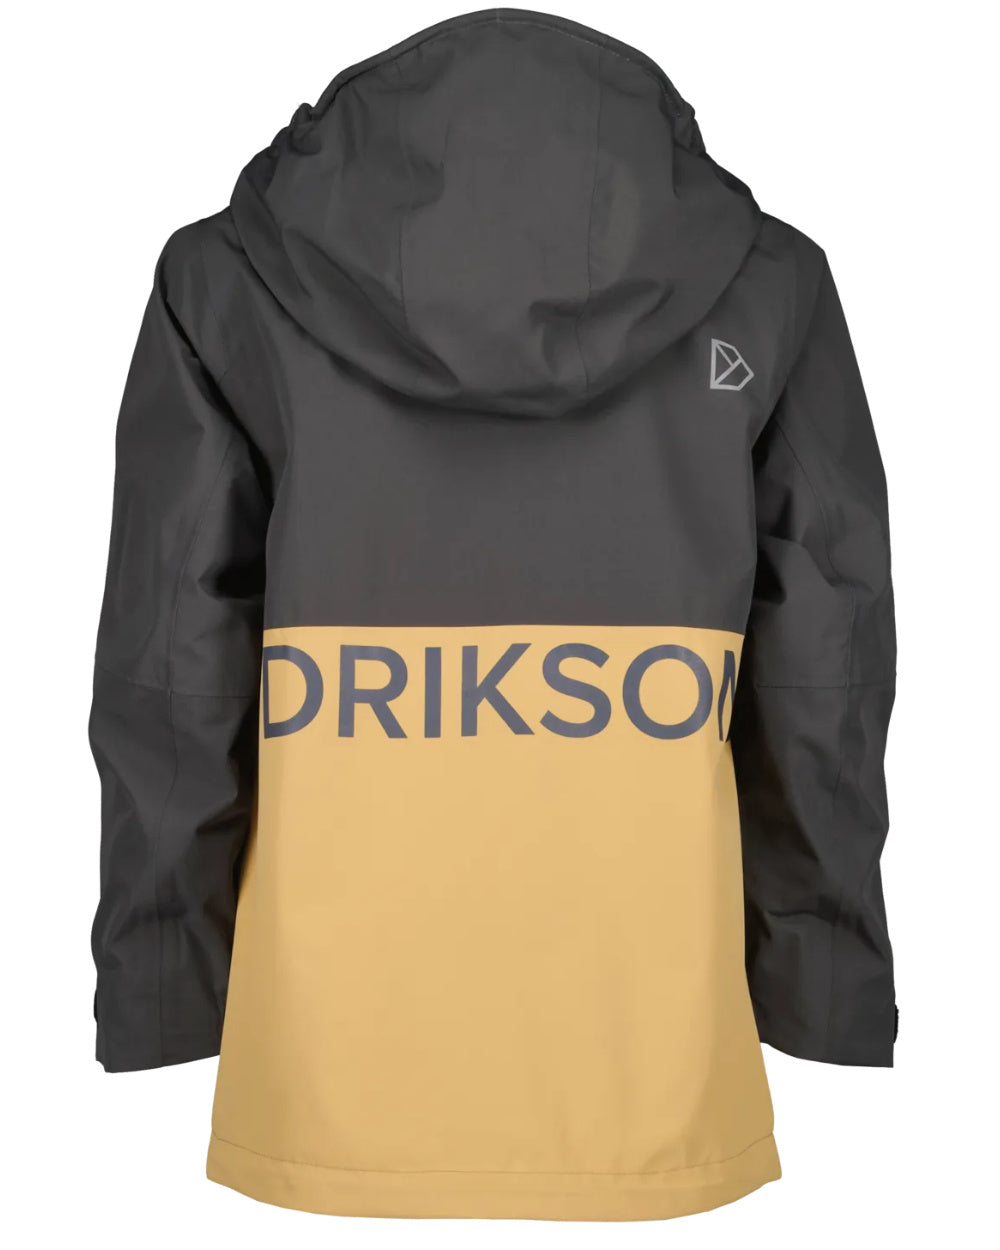 Sanstorm Coloured Didriksons Piko Childrens Jacket On A White Background 